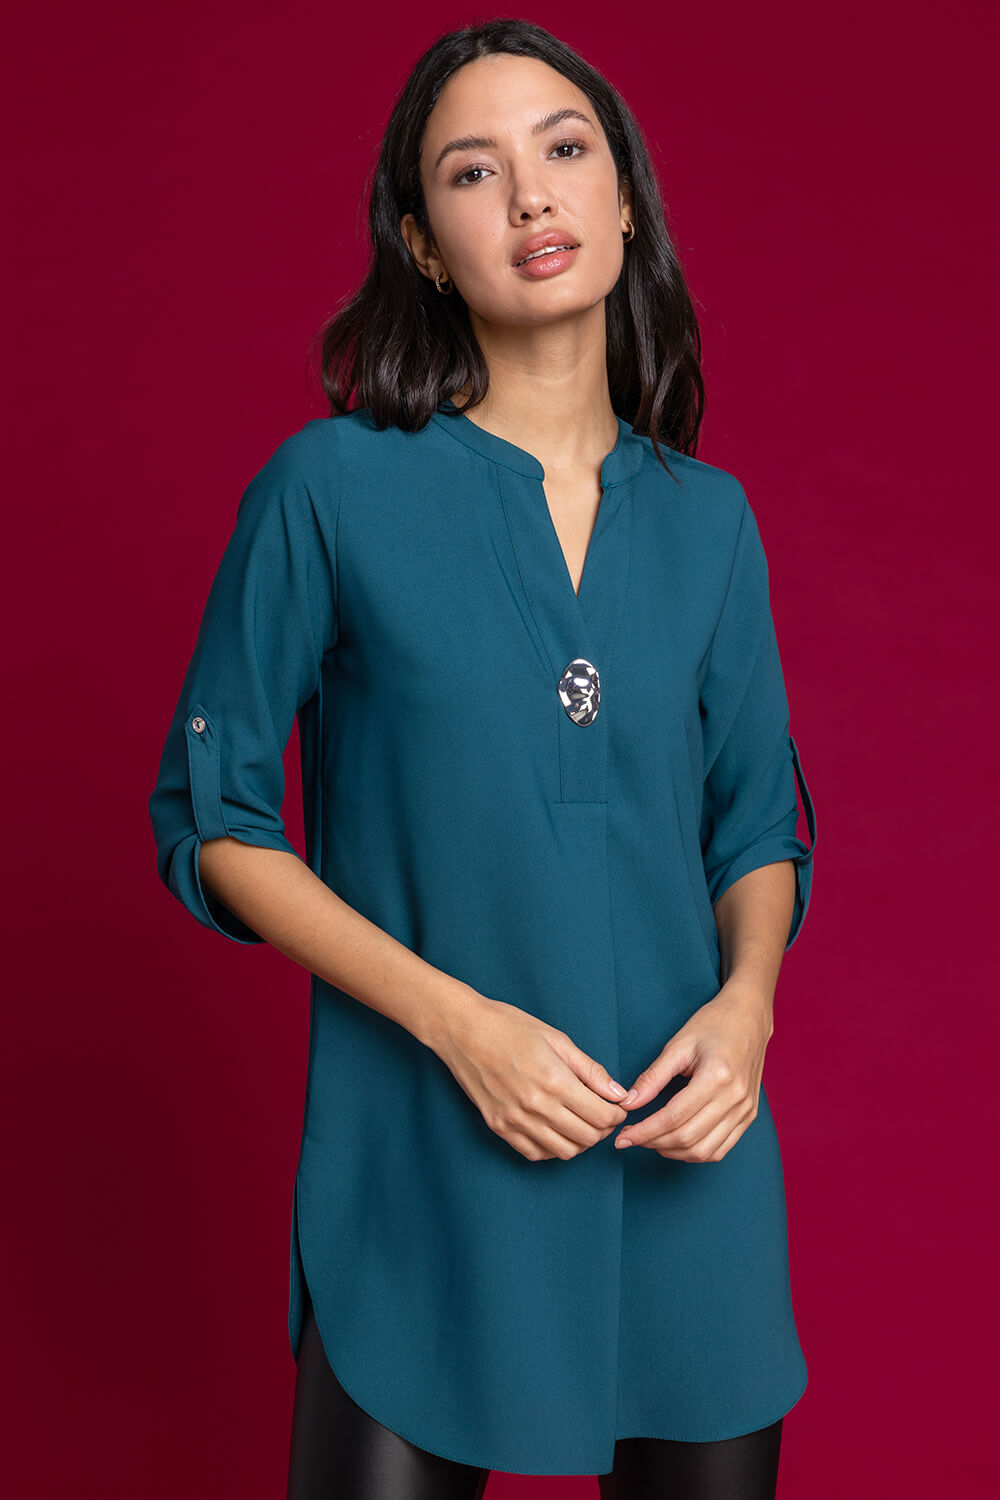 Teal Longline Button Detail Tunic Top, Image 1 of 4